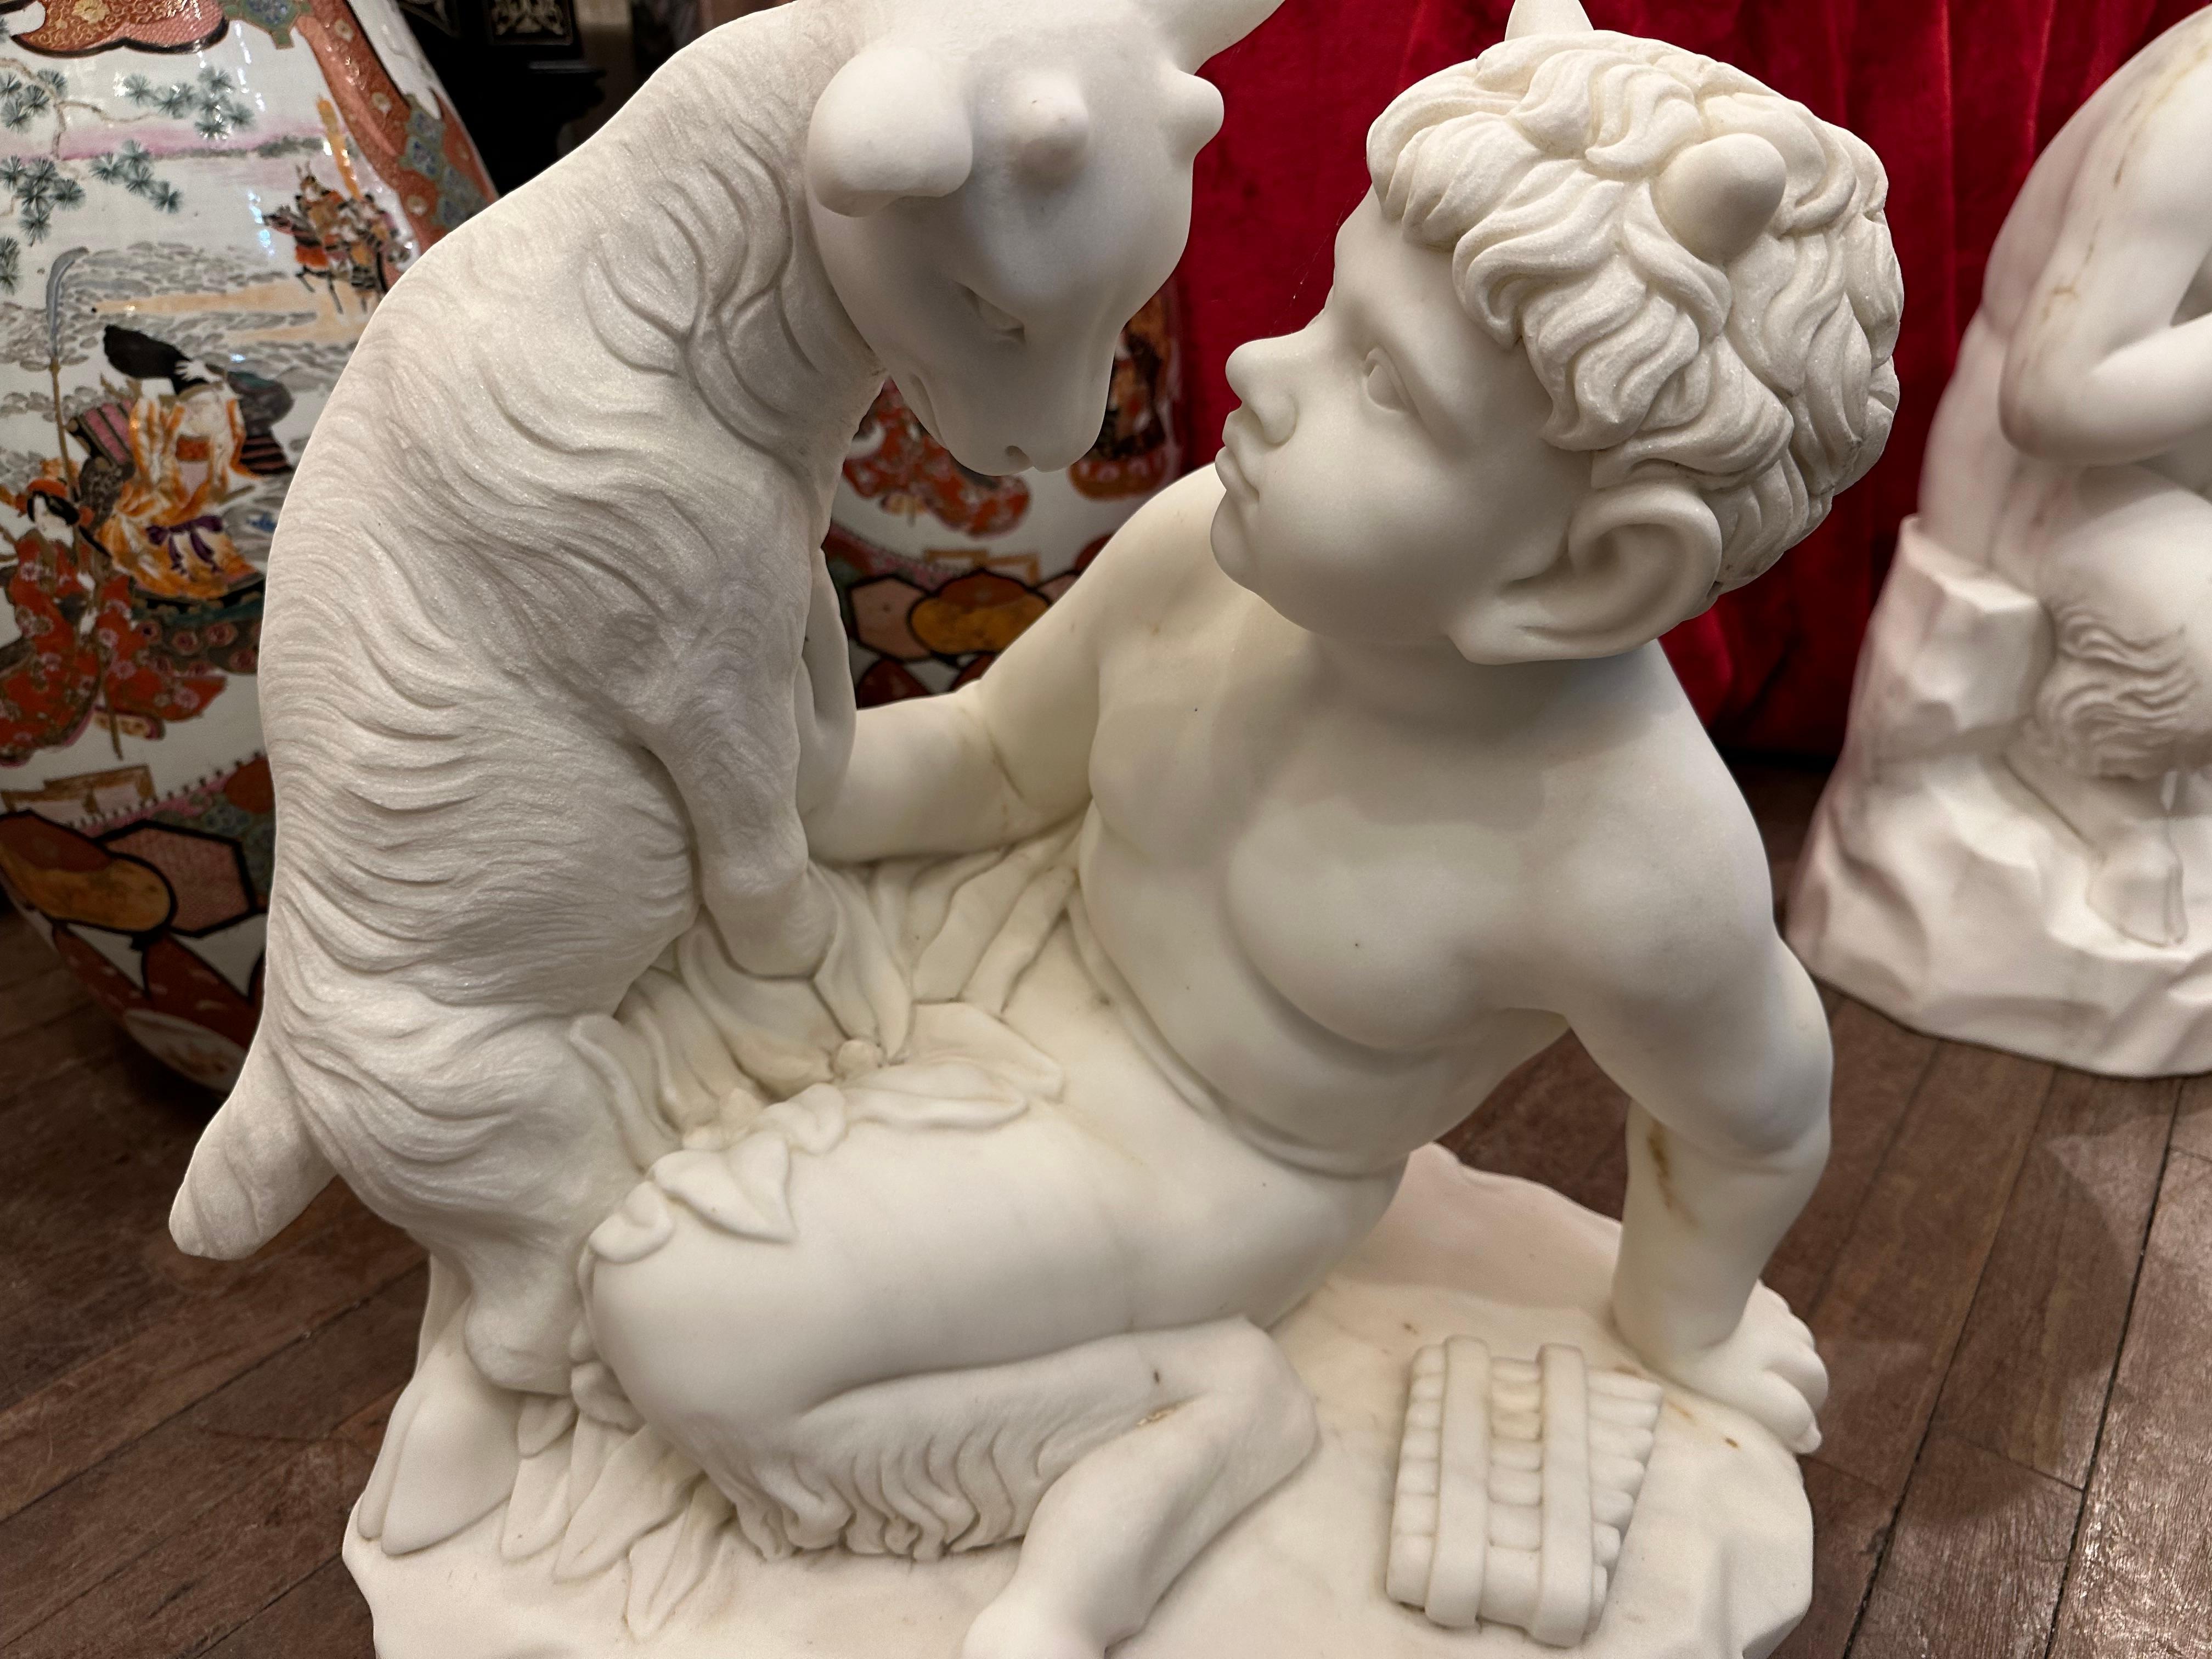 A fine marble statue of the Greek God Pan with a Goat. Carved in great detail, with clear features on both the goat and Pan, right down to the Goats fur which delicately curls to the muscular body of Pan. A lovely piece that exudes a sense of